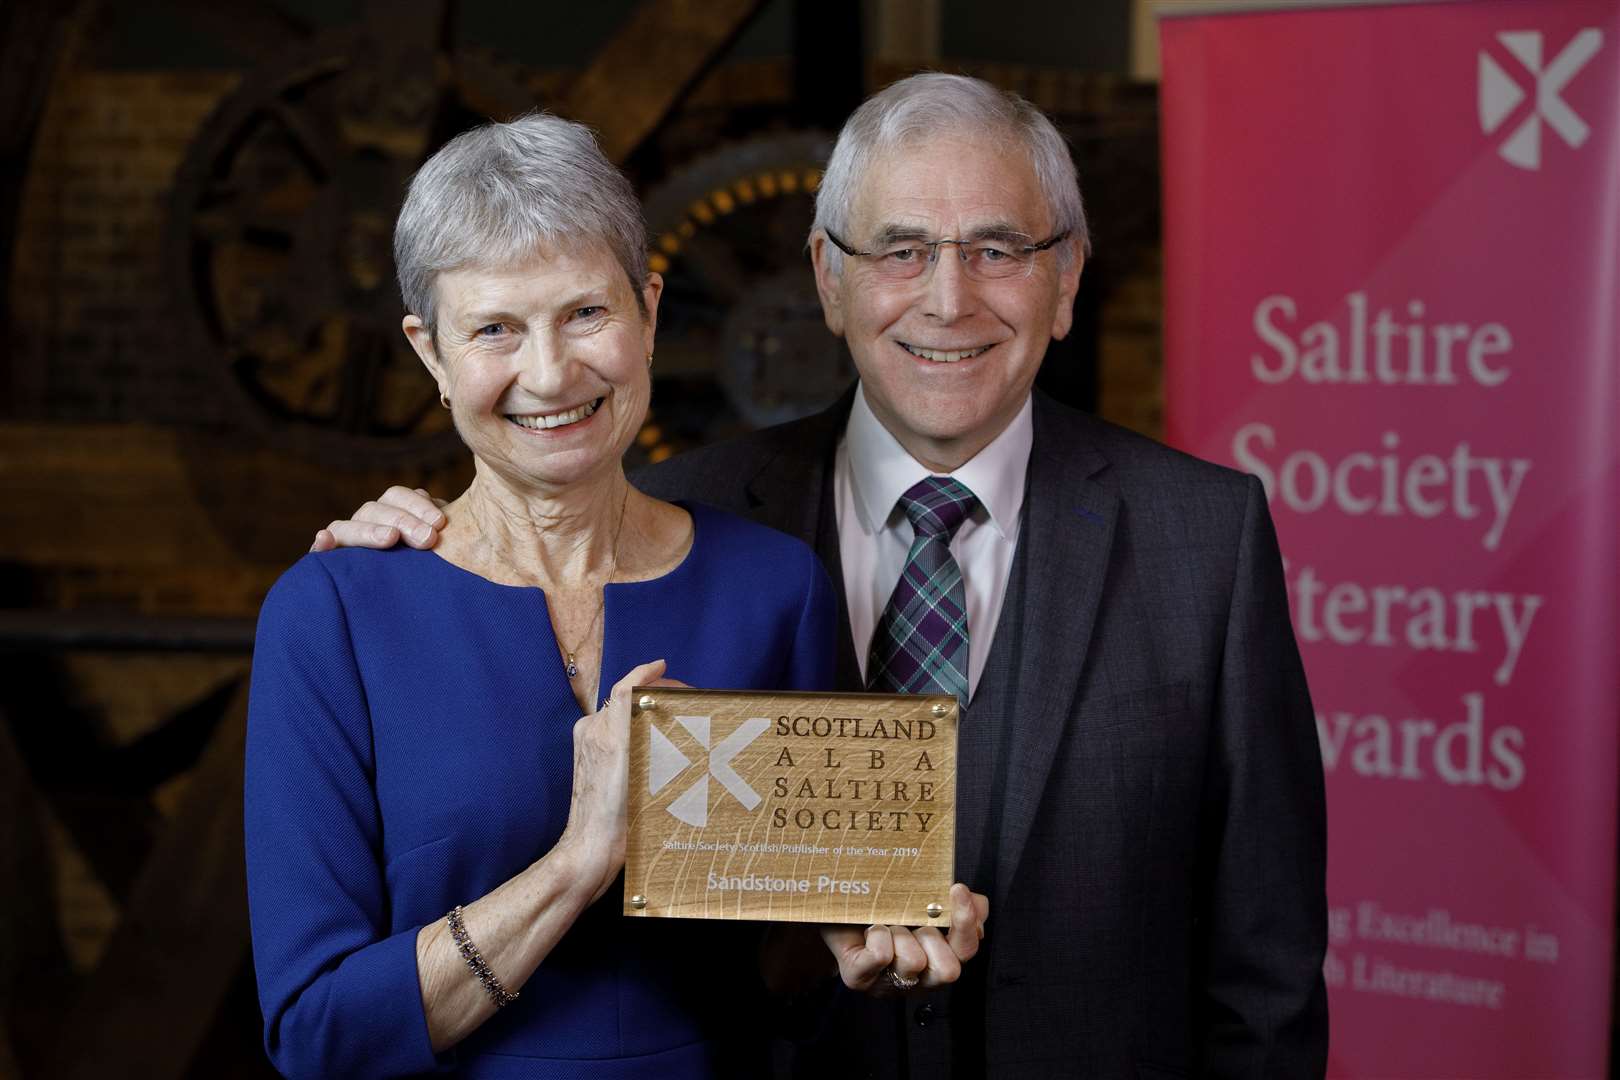 Bob and Moira accepting The Saltire Society Scottish Publisher of the Year award. Picture: Graham Clark